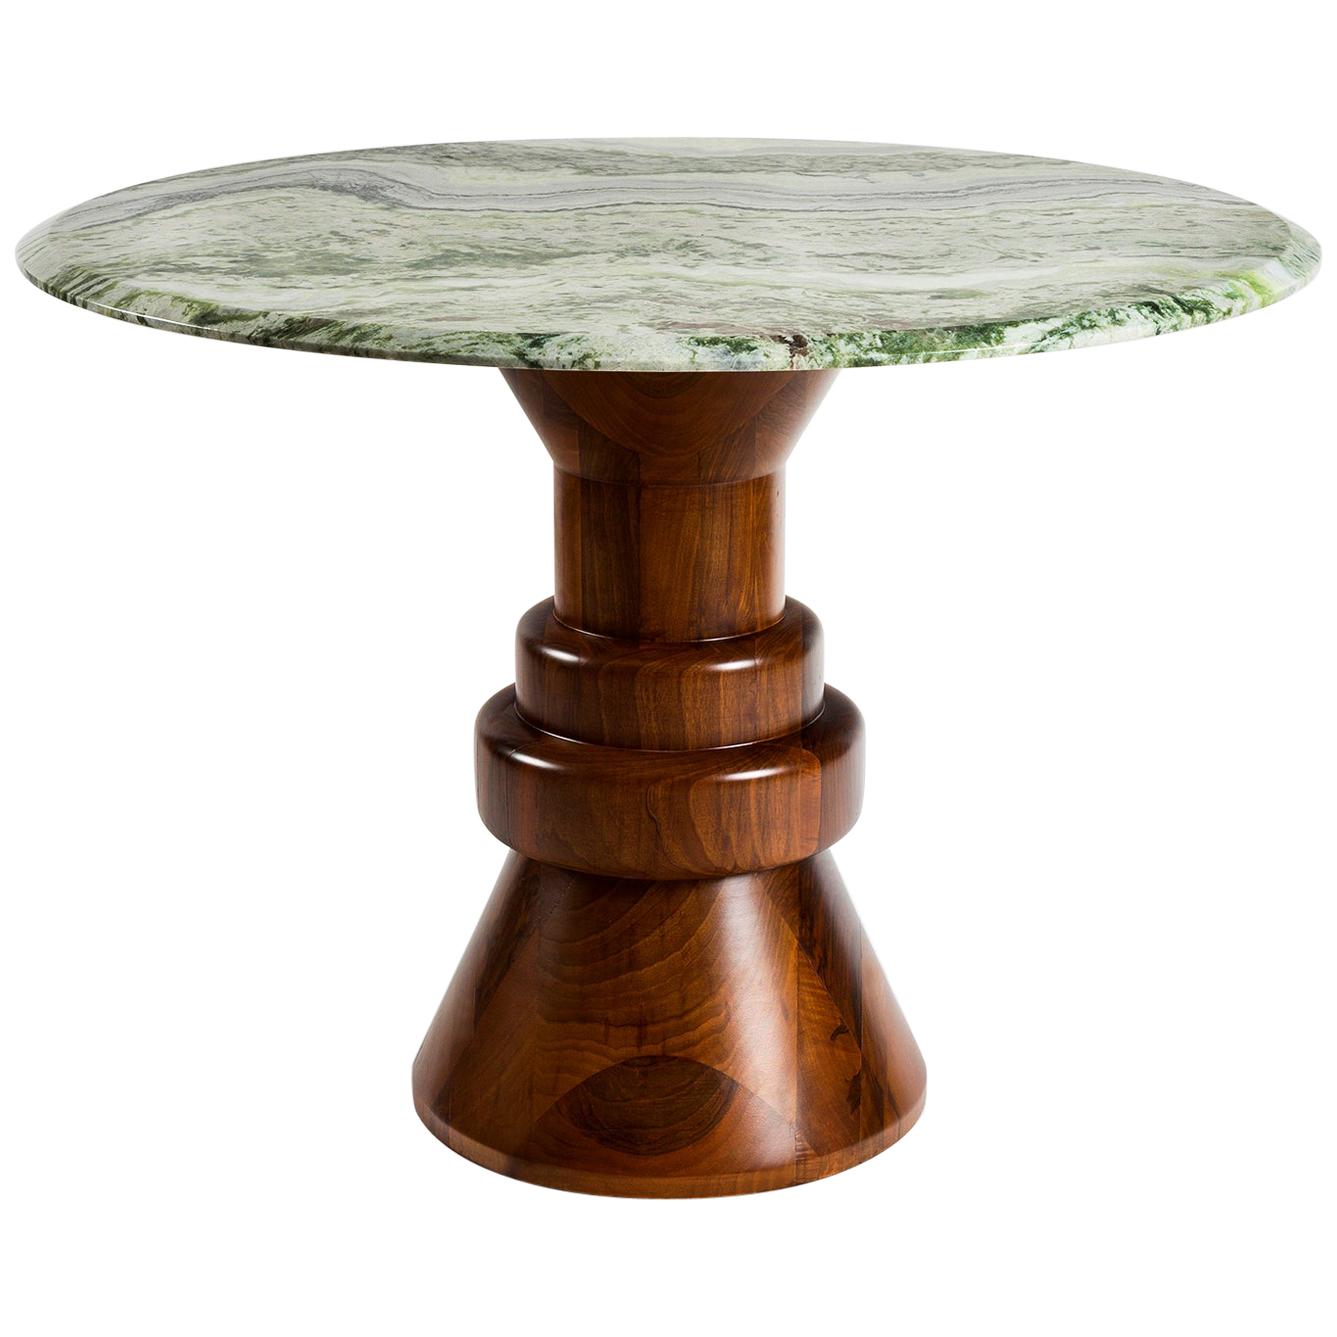 This playful handcrafted dining table is perfect to accommodate 4 people in smaller spaces. Cream marble top is combined with sculptural wooden base and can be customized in different sizes and marble tops.